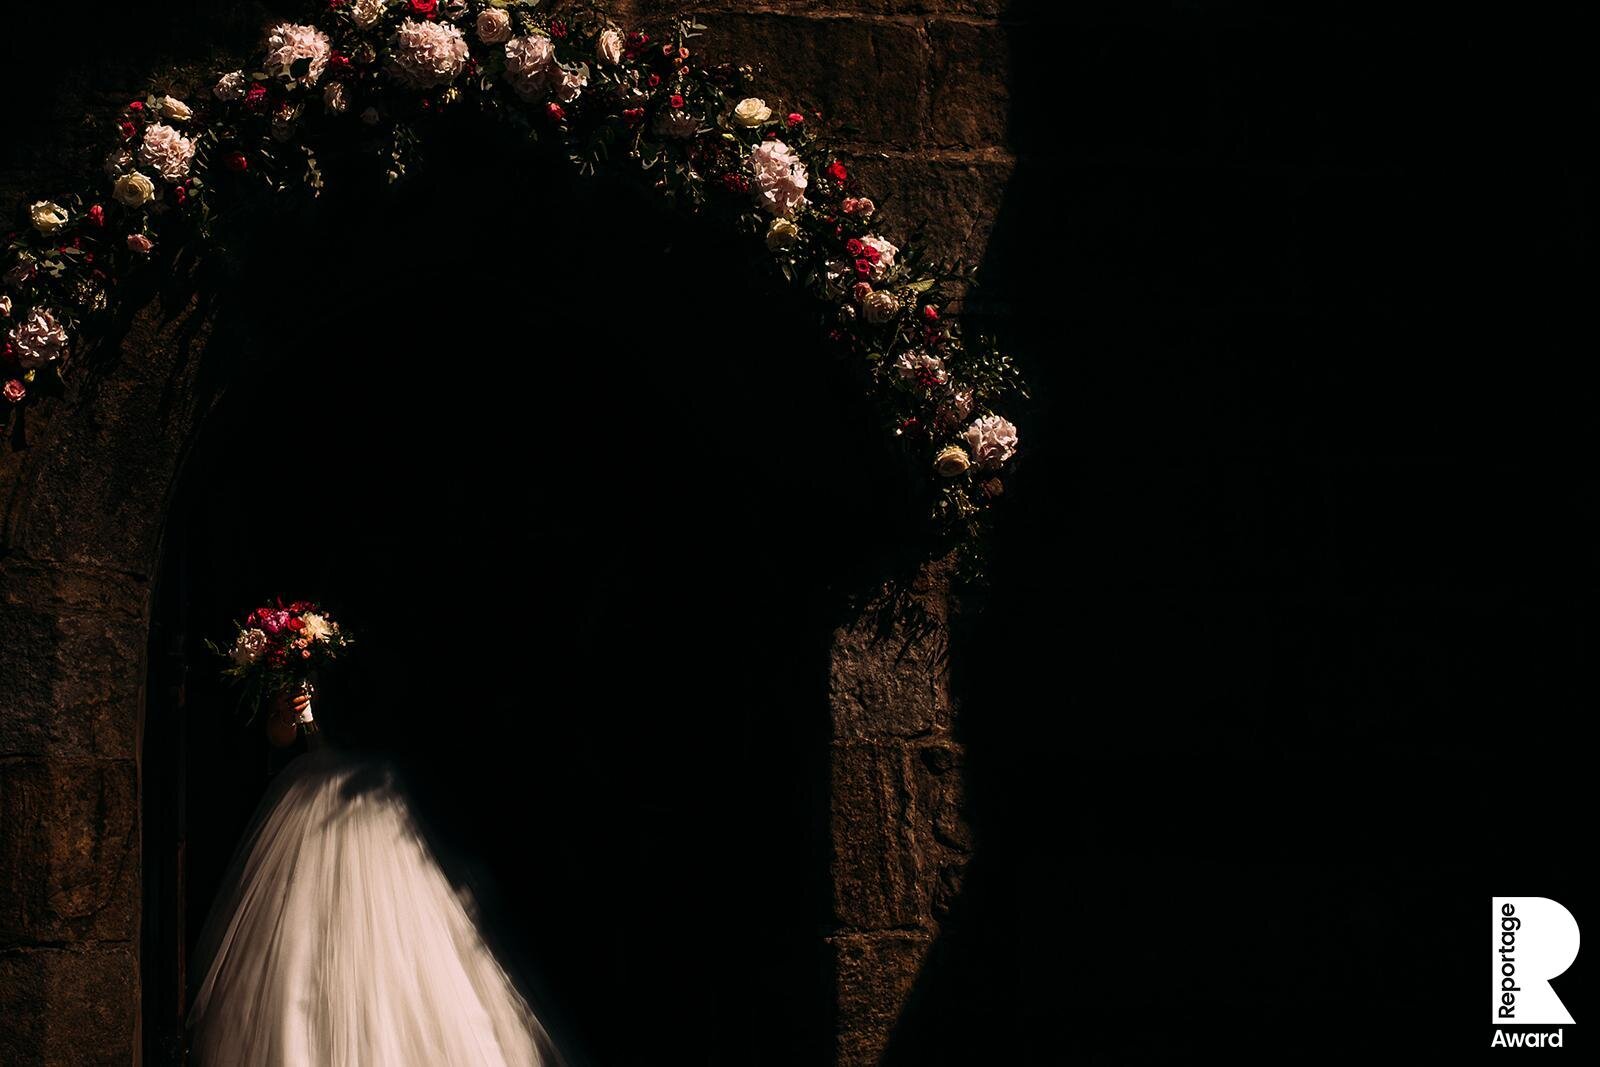  bride walking out of church. Light only picking up part of the dress and flowers 